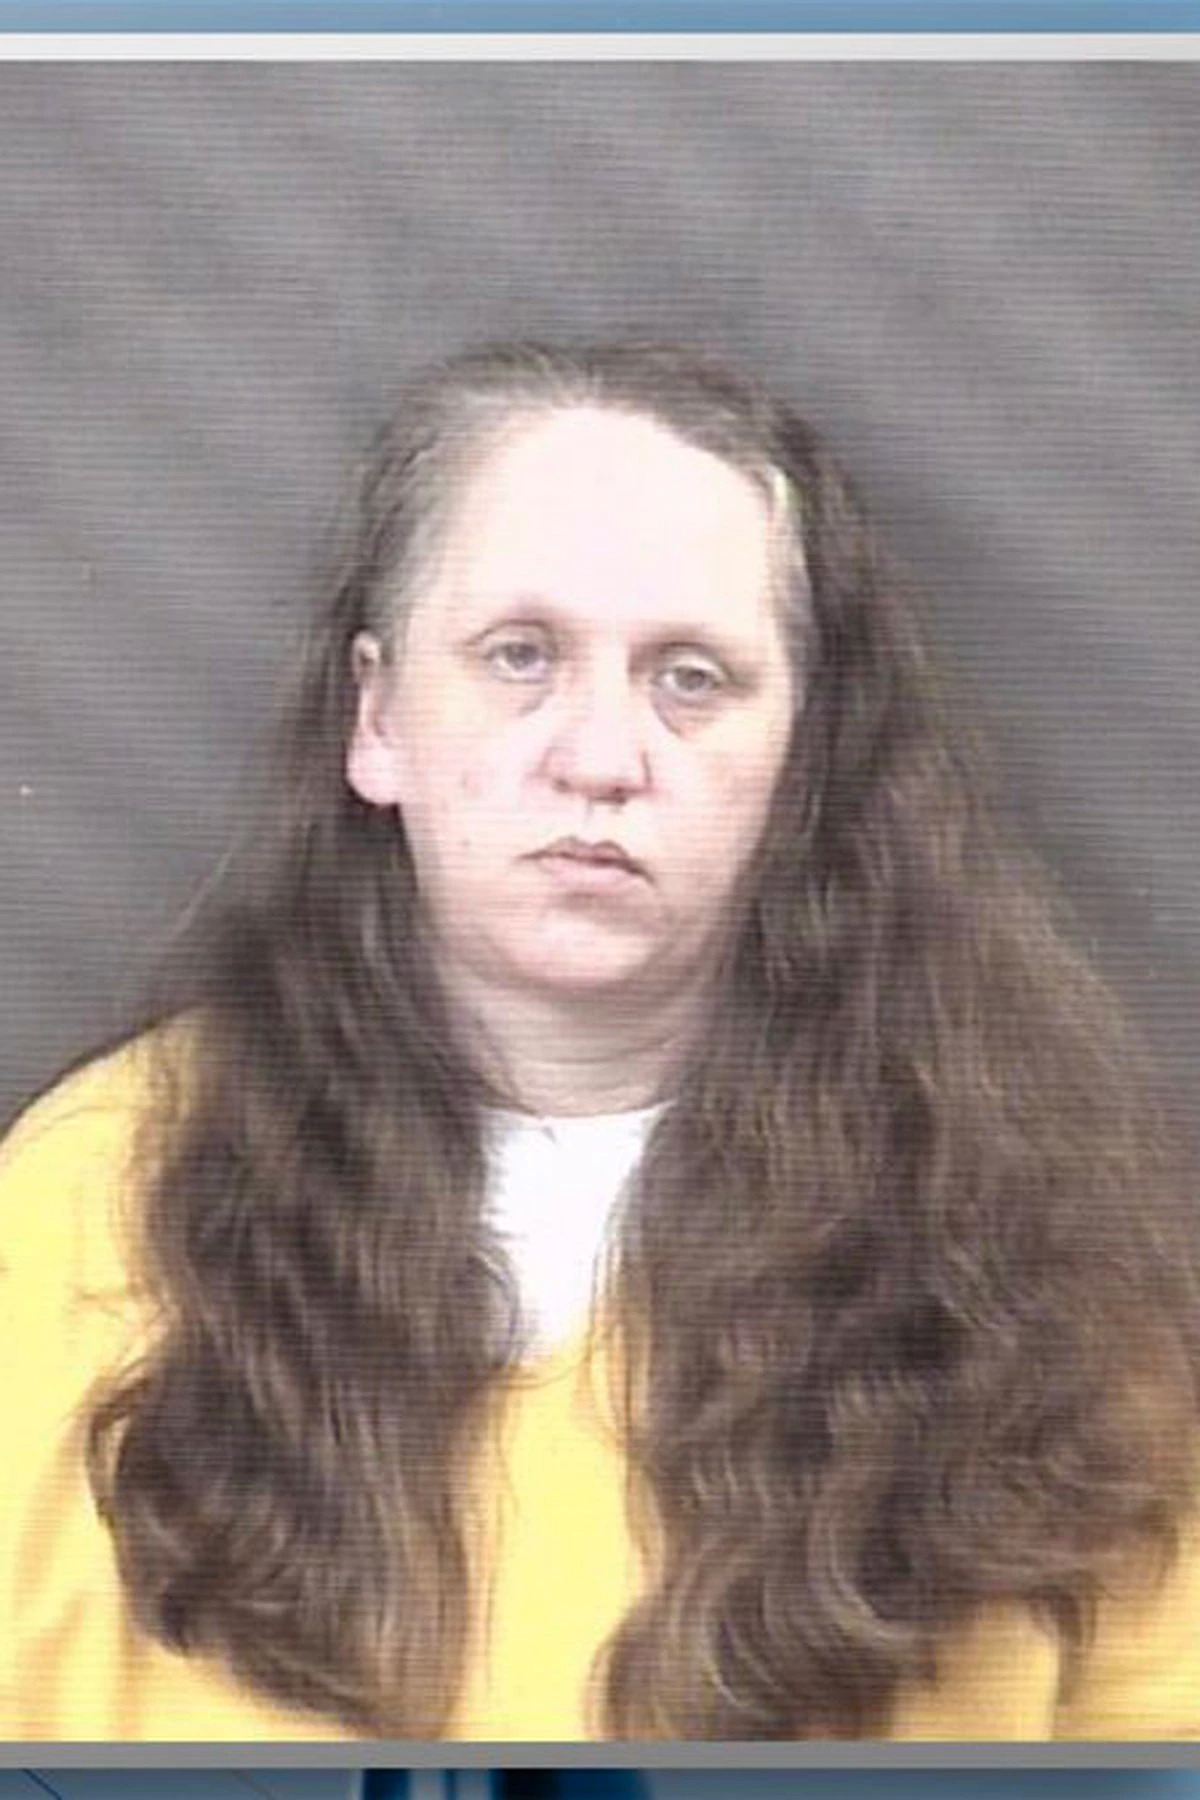 [IMAGE] Ohio woman sentenced to 2 years in prison in 1992 death of 'Baby April'